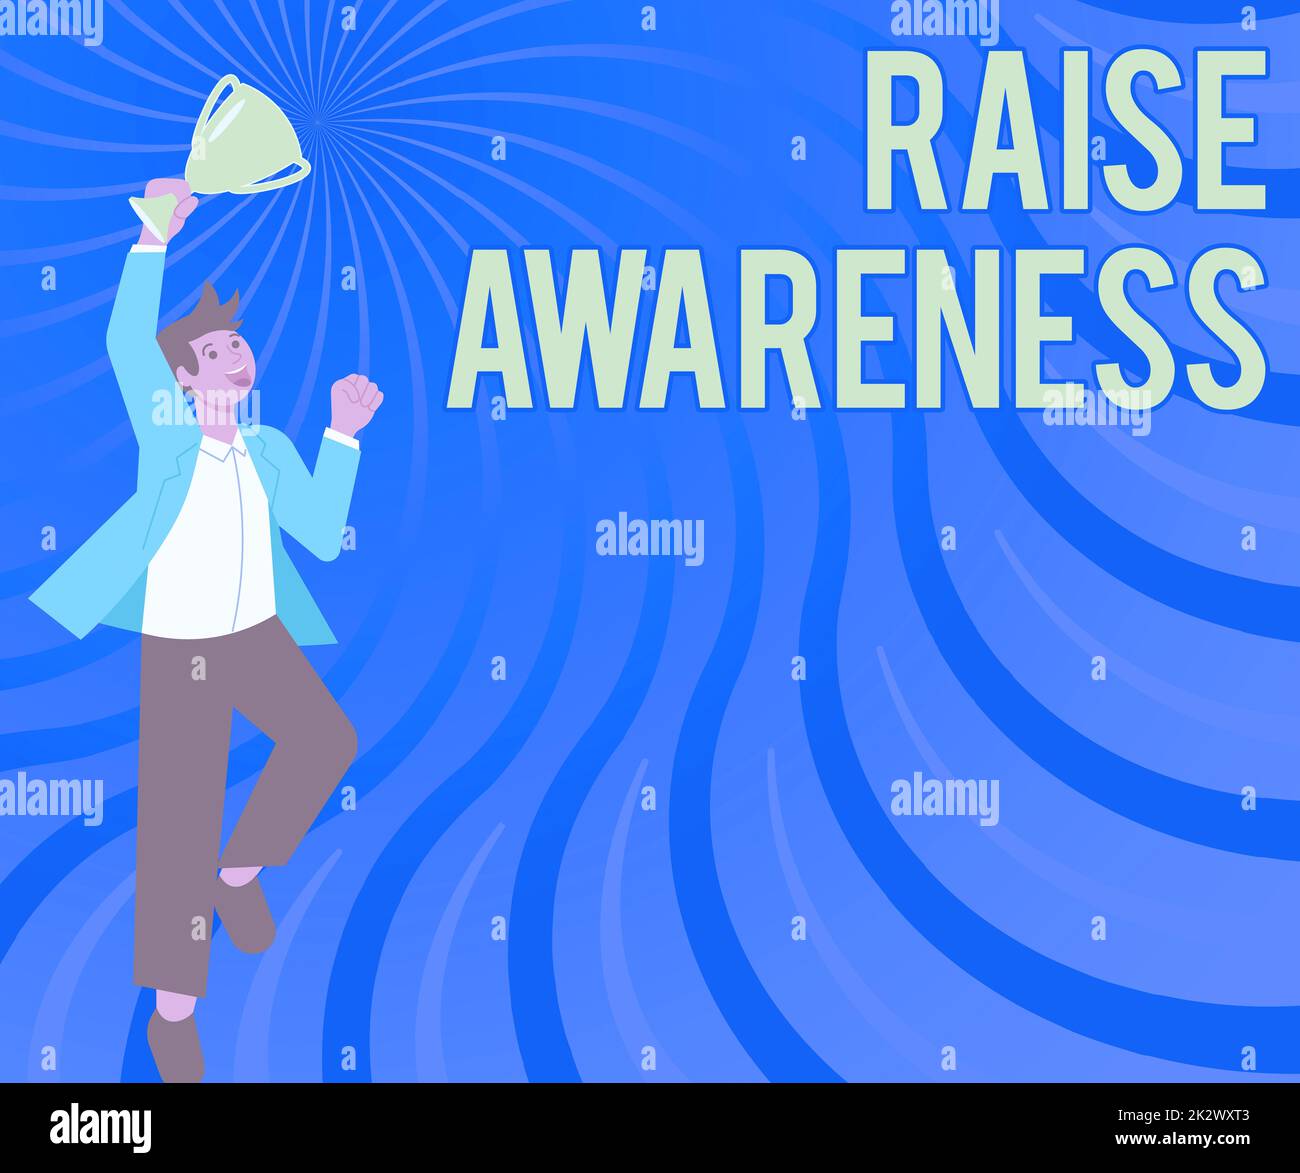 Text caption presenting Raise Awareness. Business concept creating a specific messaging campaign about an issue Gentleman Jumping Excitedly Holding Trophy Showing Accomplishments. Stock Photo